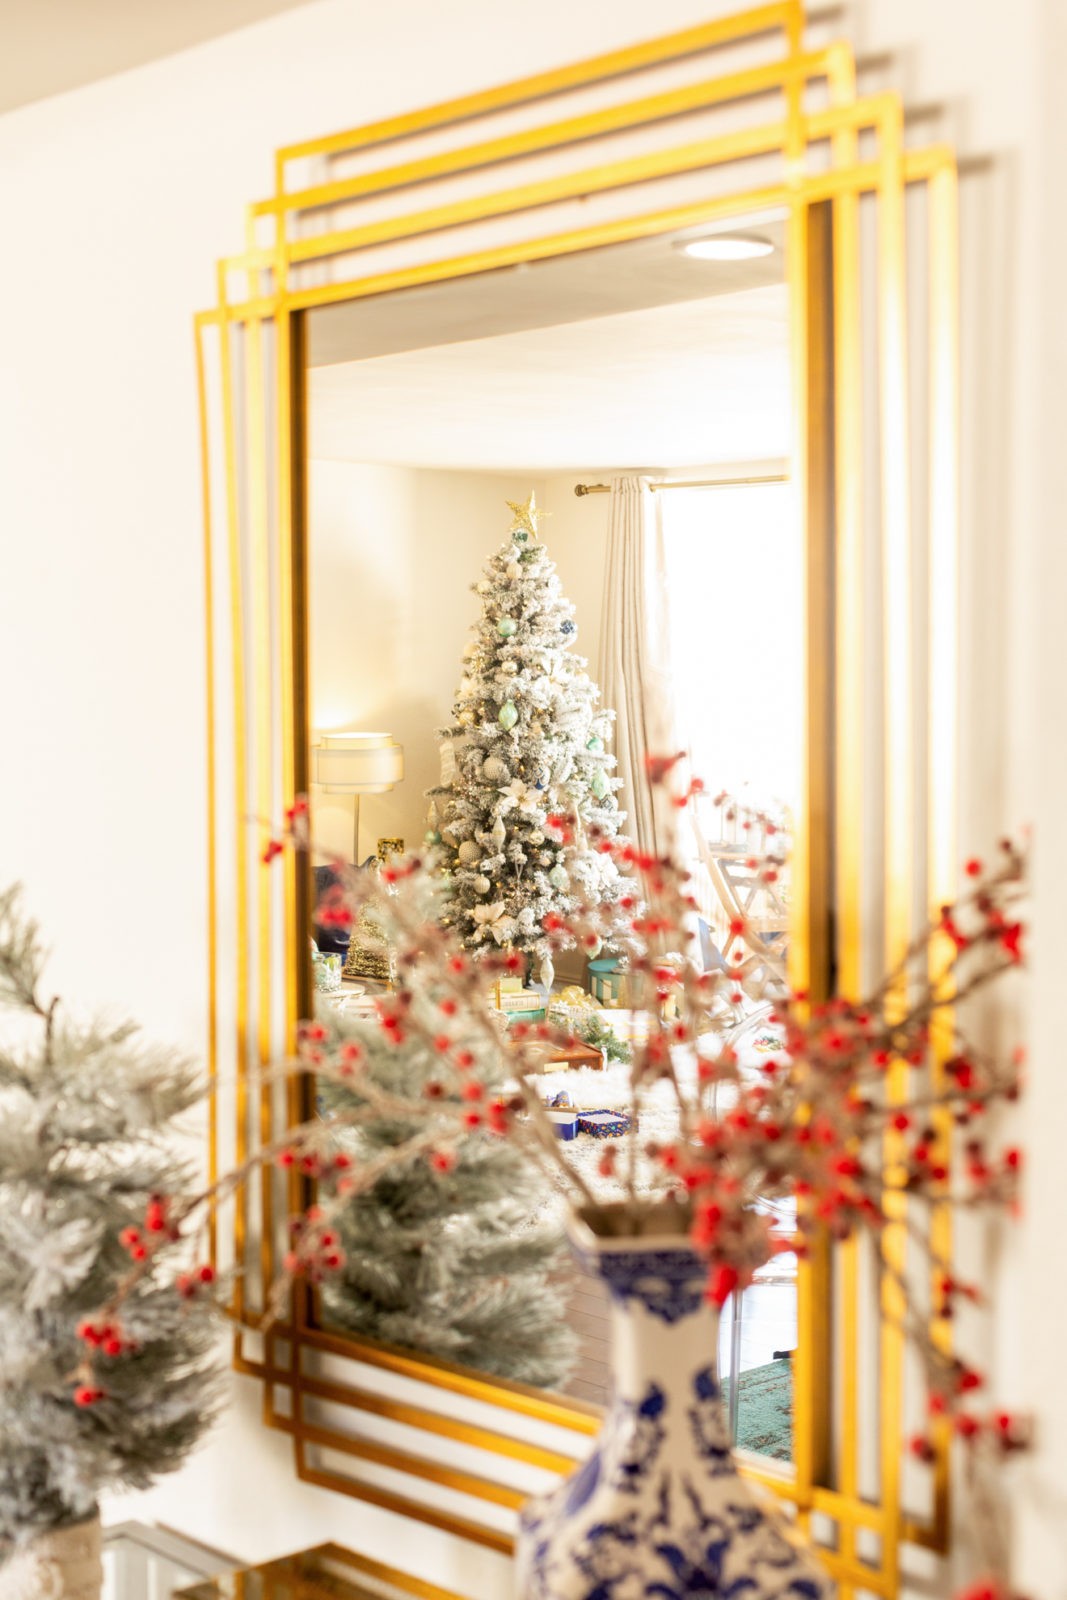 Holiday Home Decor by Home Decor Blogger Laura Lily, Christmas Decorating Ideas | Holiday Home Decor 2019 by popular Los Angeles life and style blogger, Laura Lily: image of a flocked Christmas tree.